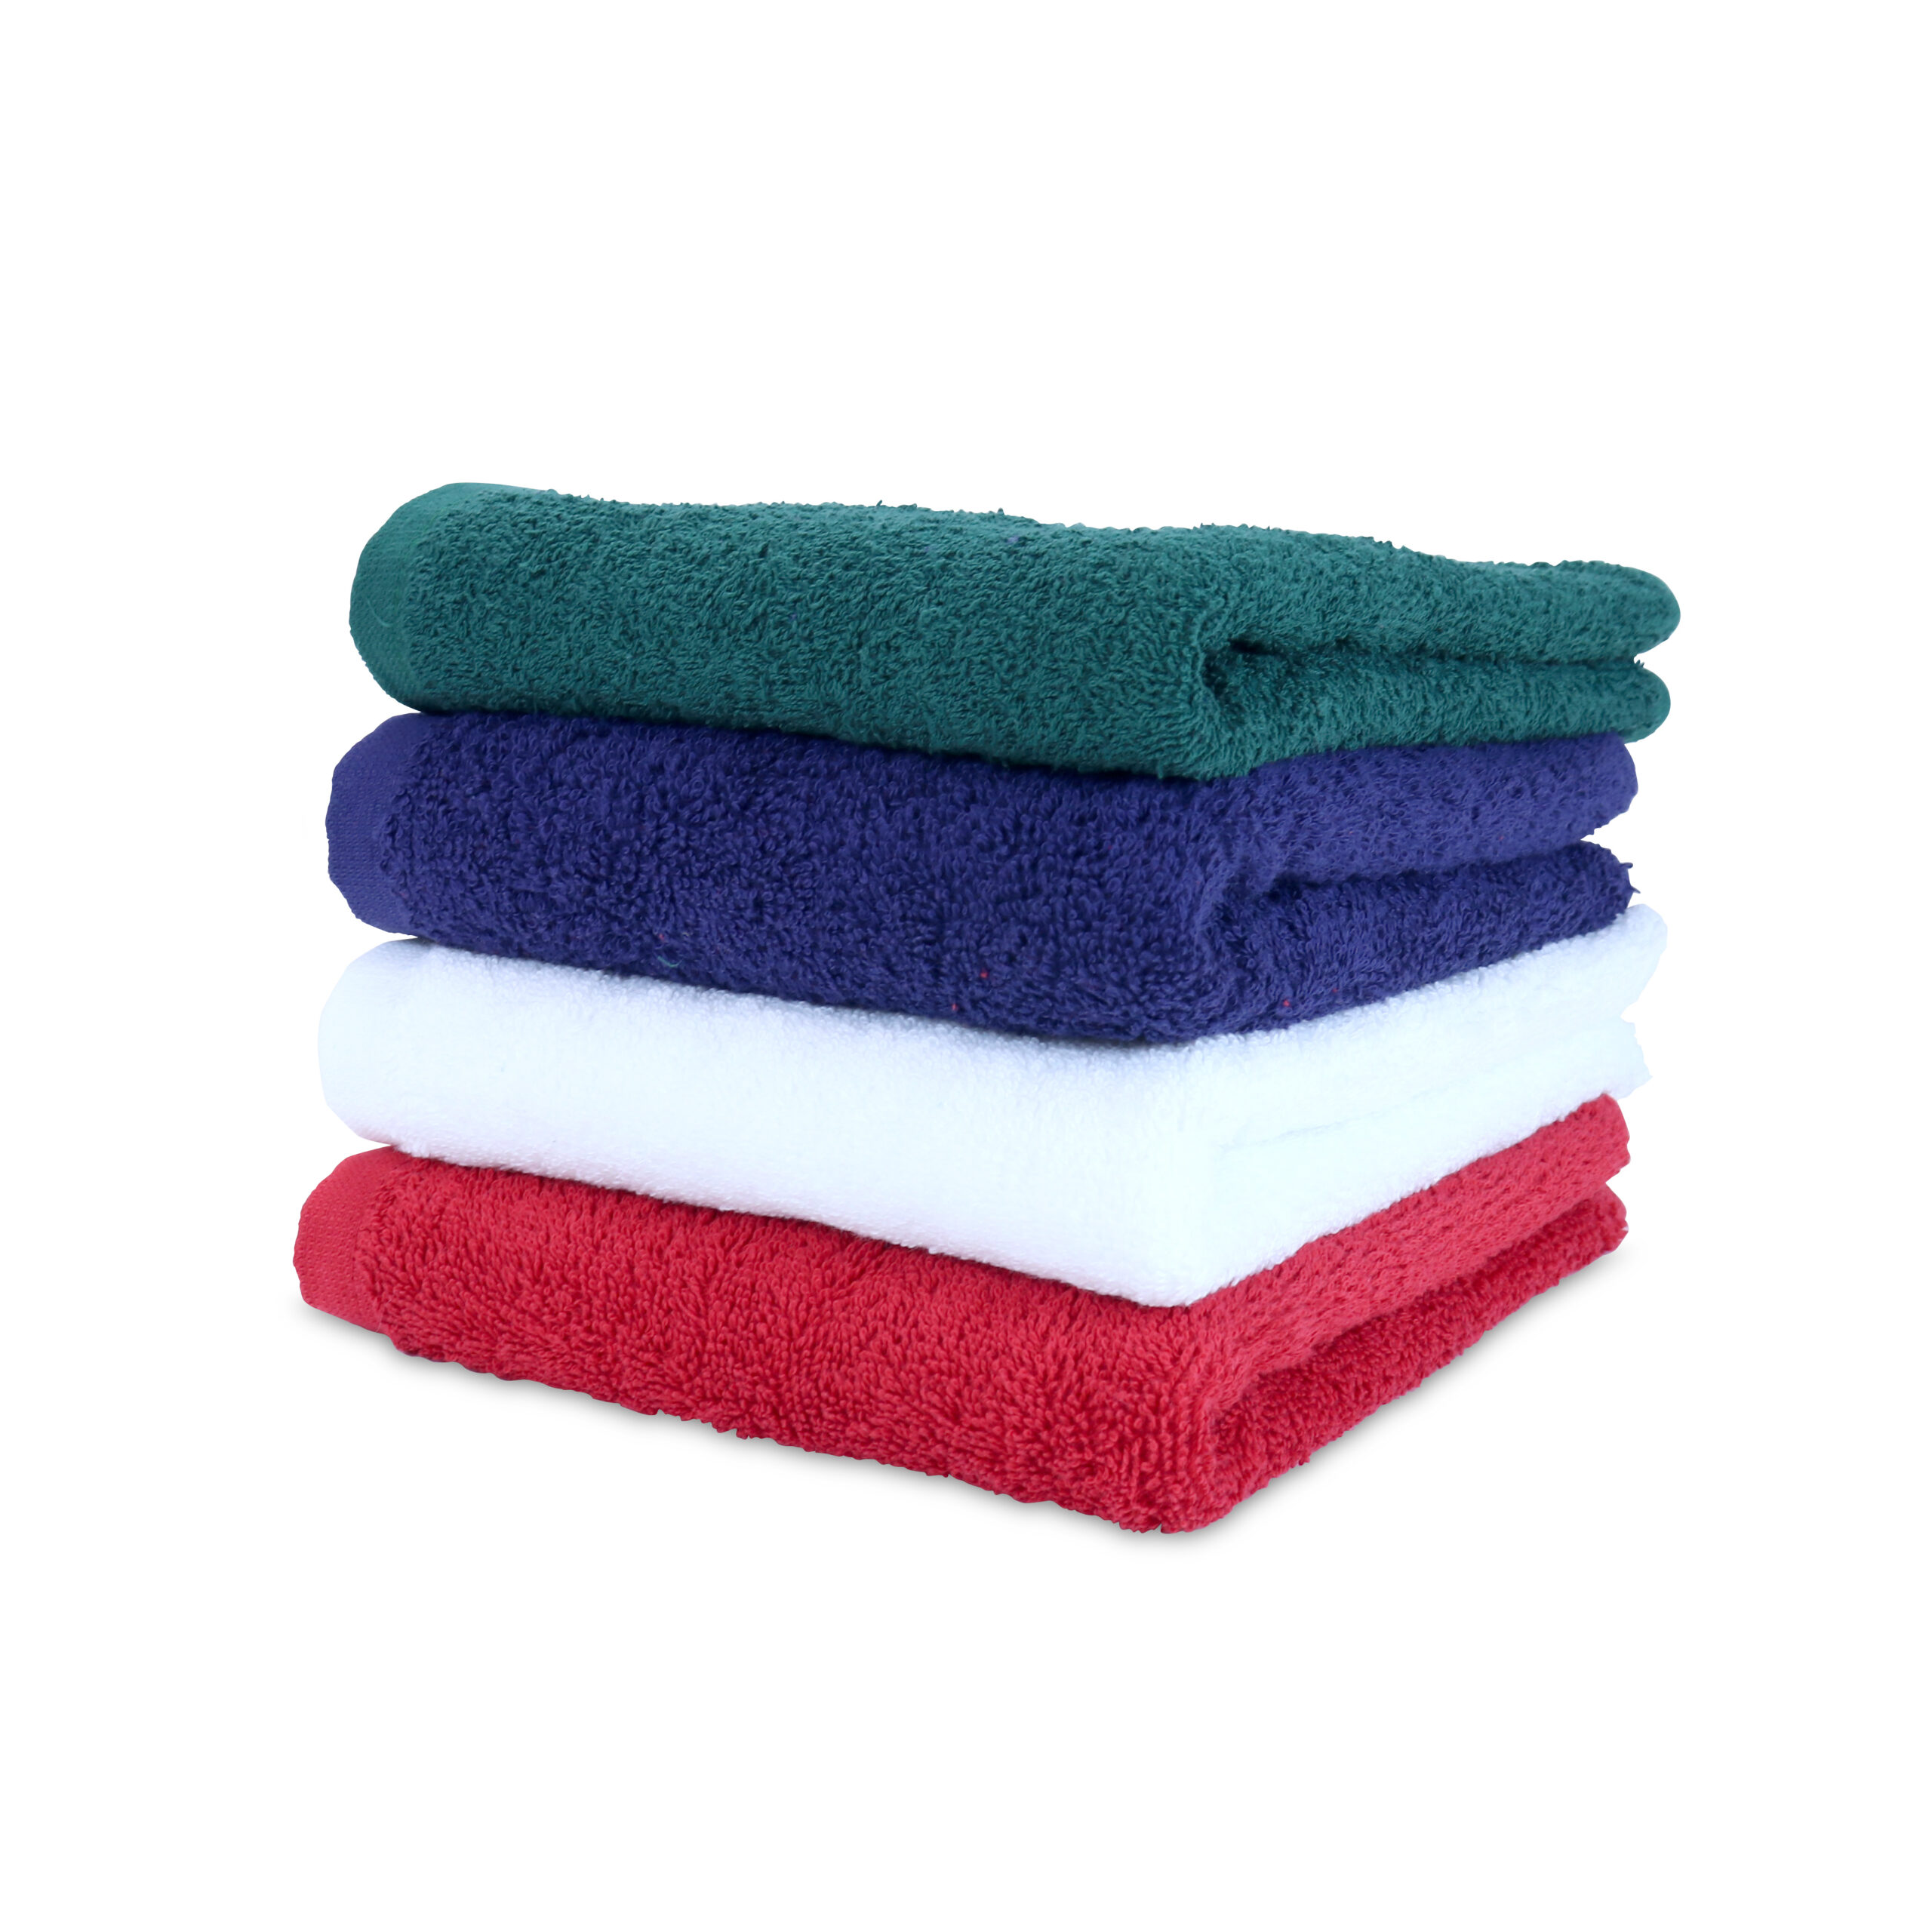 Monarch N-C54-50 Hand Towel Size Terry Wipers - Colored 50 lb Box